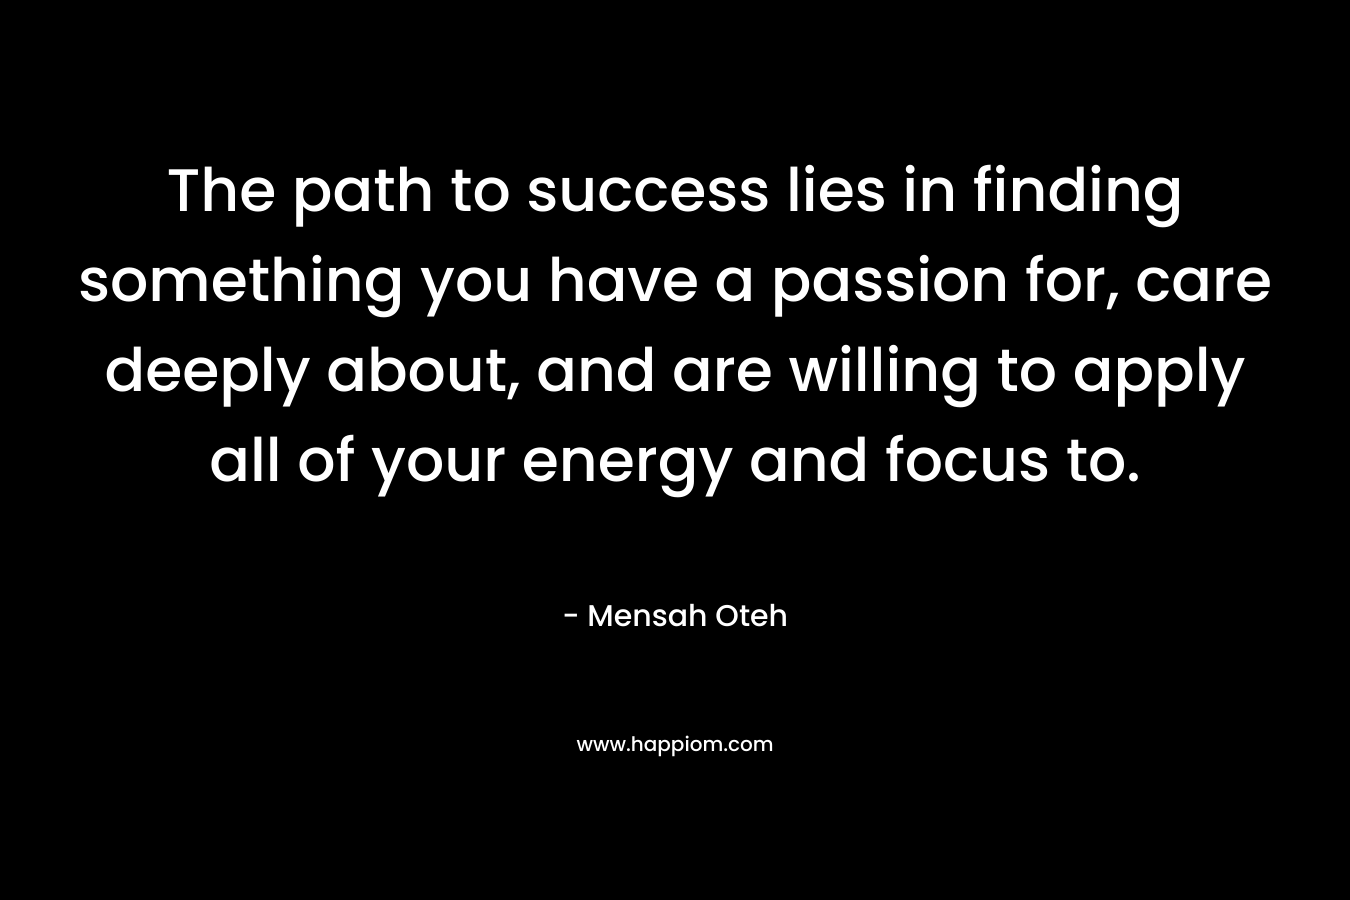 The path to success lies in finding something you have a passion for, care deeply about, and are willing to apply all of your energy and focus to.